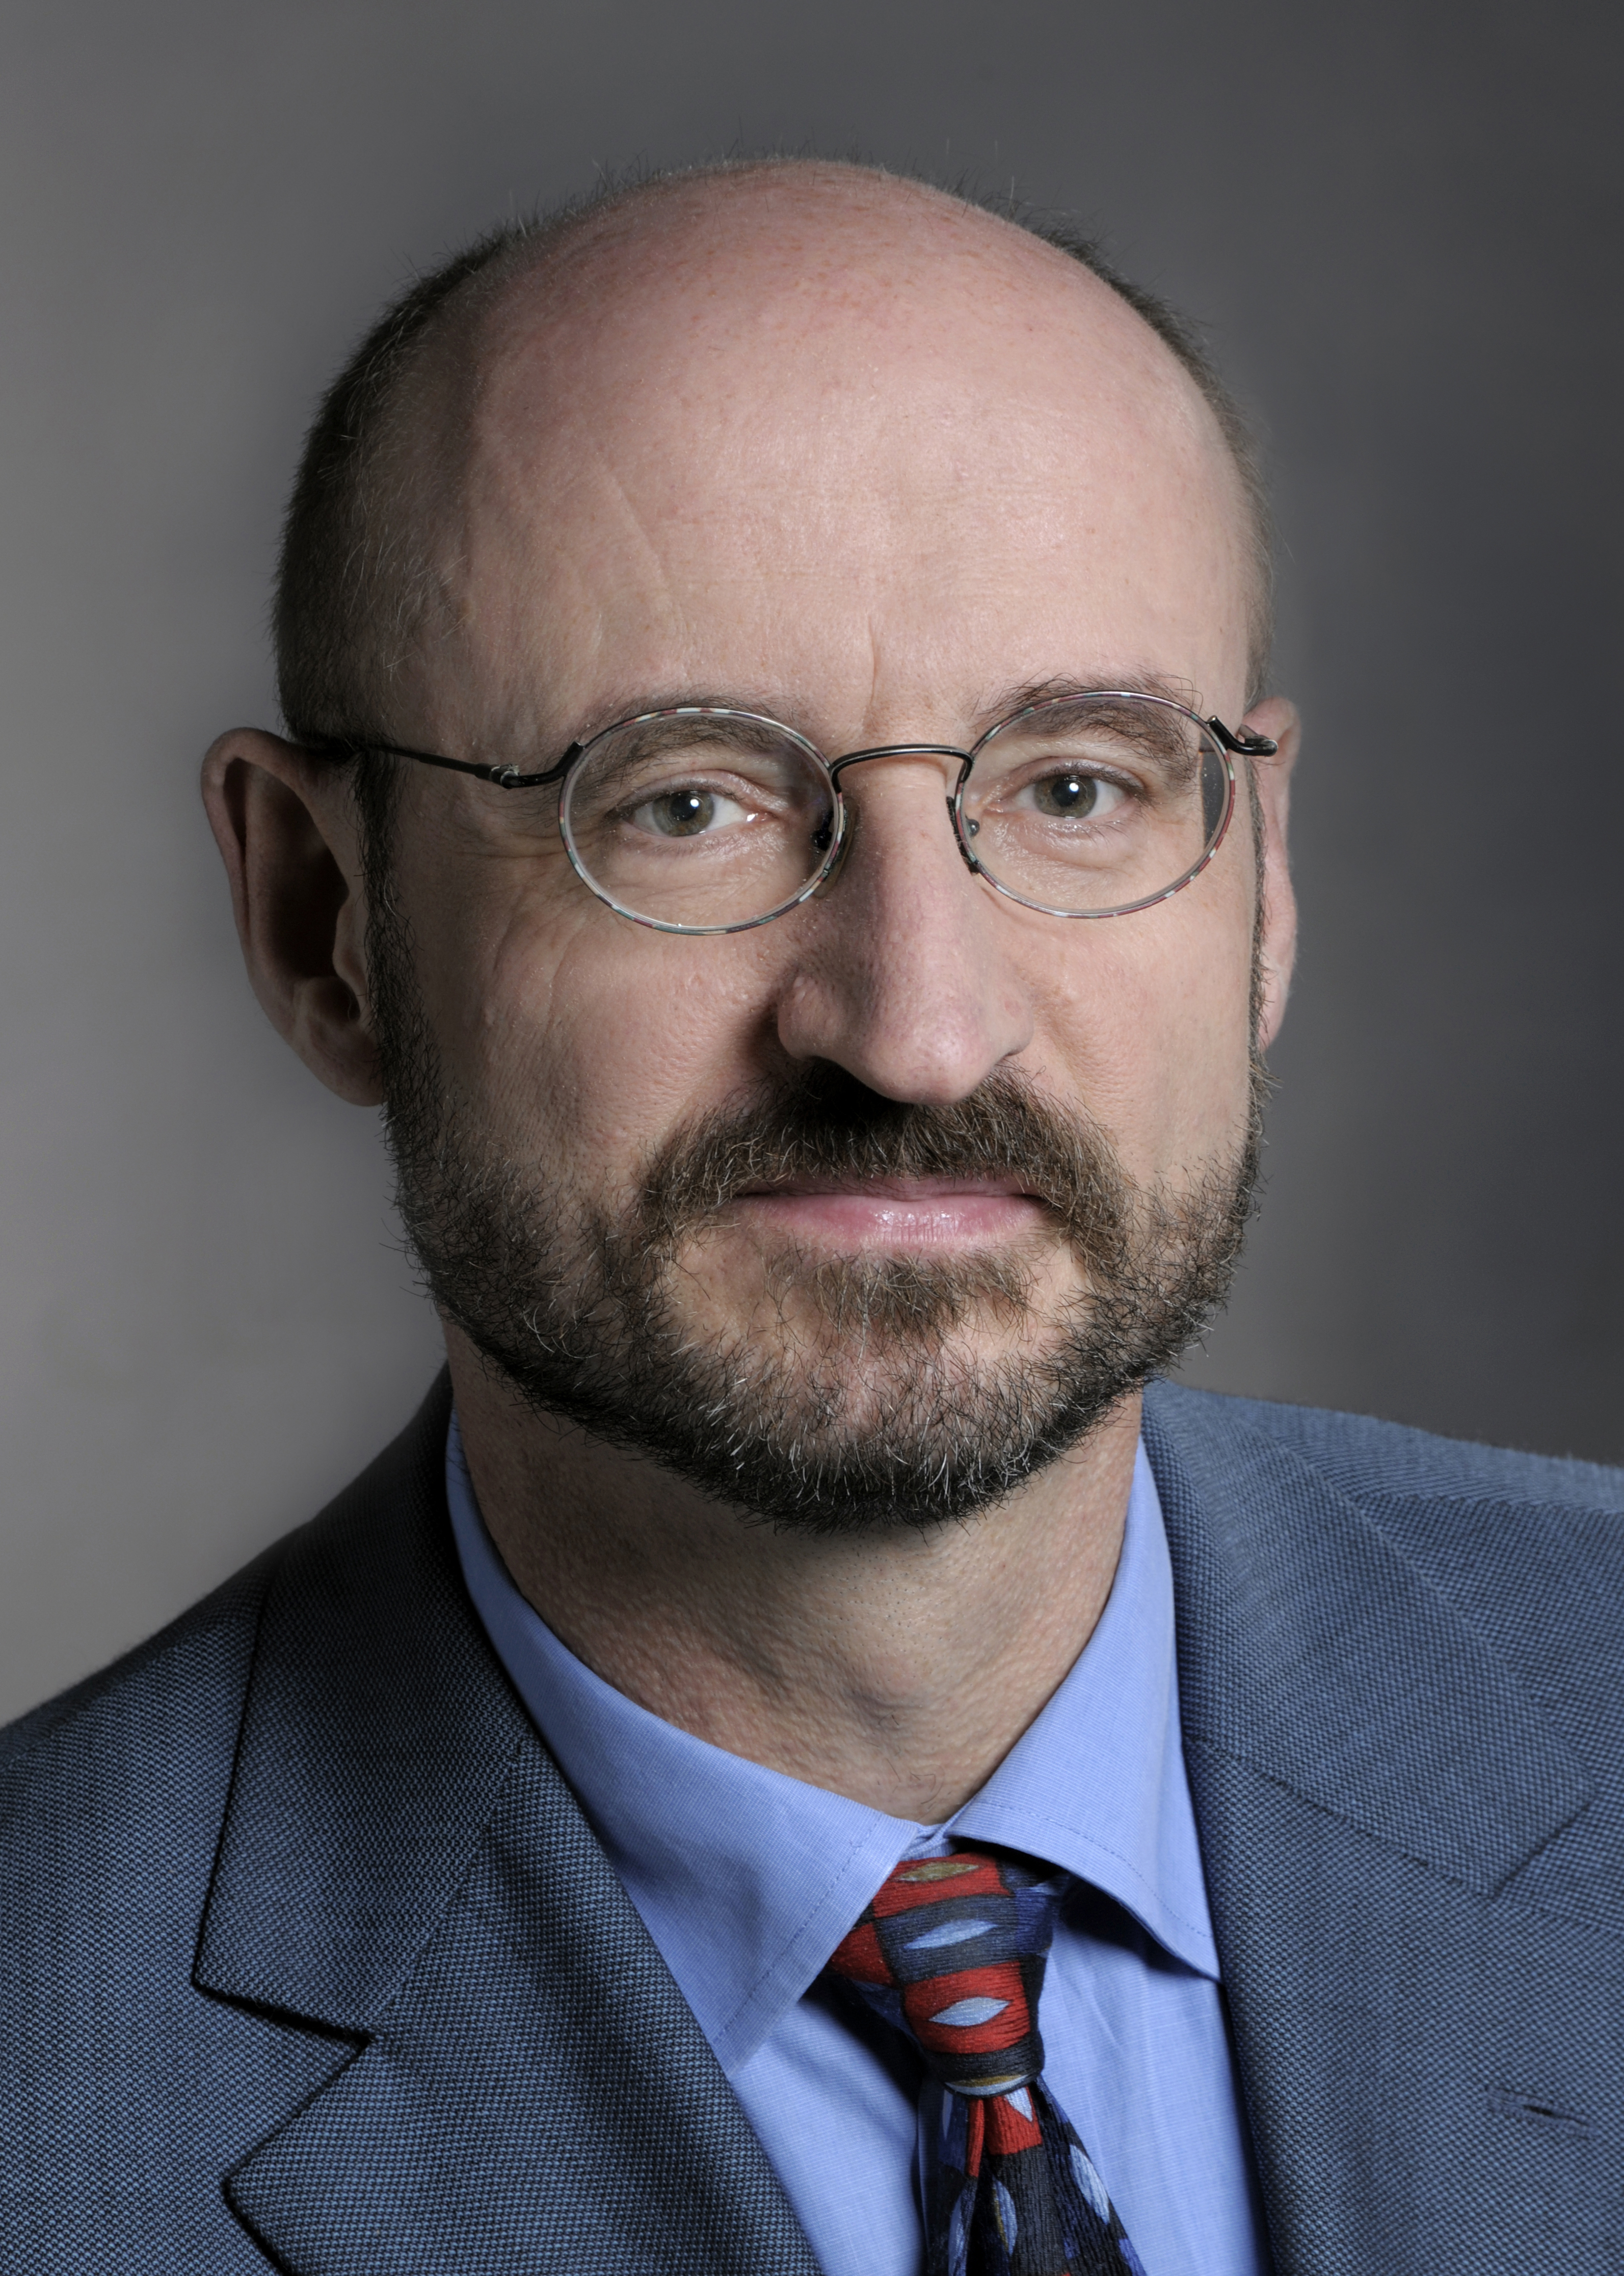 Mathias Rohe holds the chair for civil law, private international law and comparative law at the Friedrich Alexander University Erlangen-Nuremberg